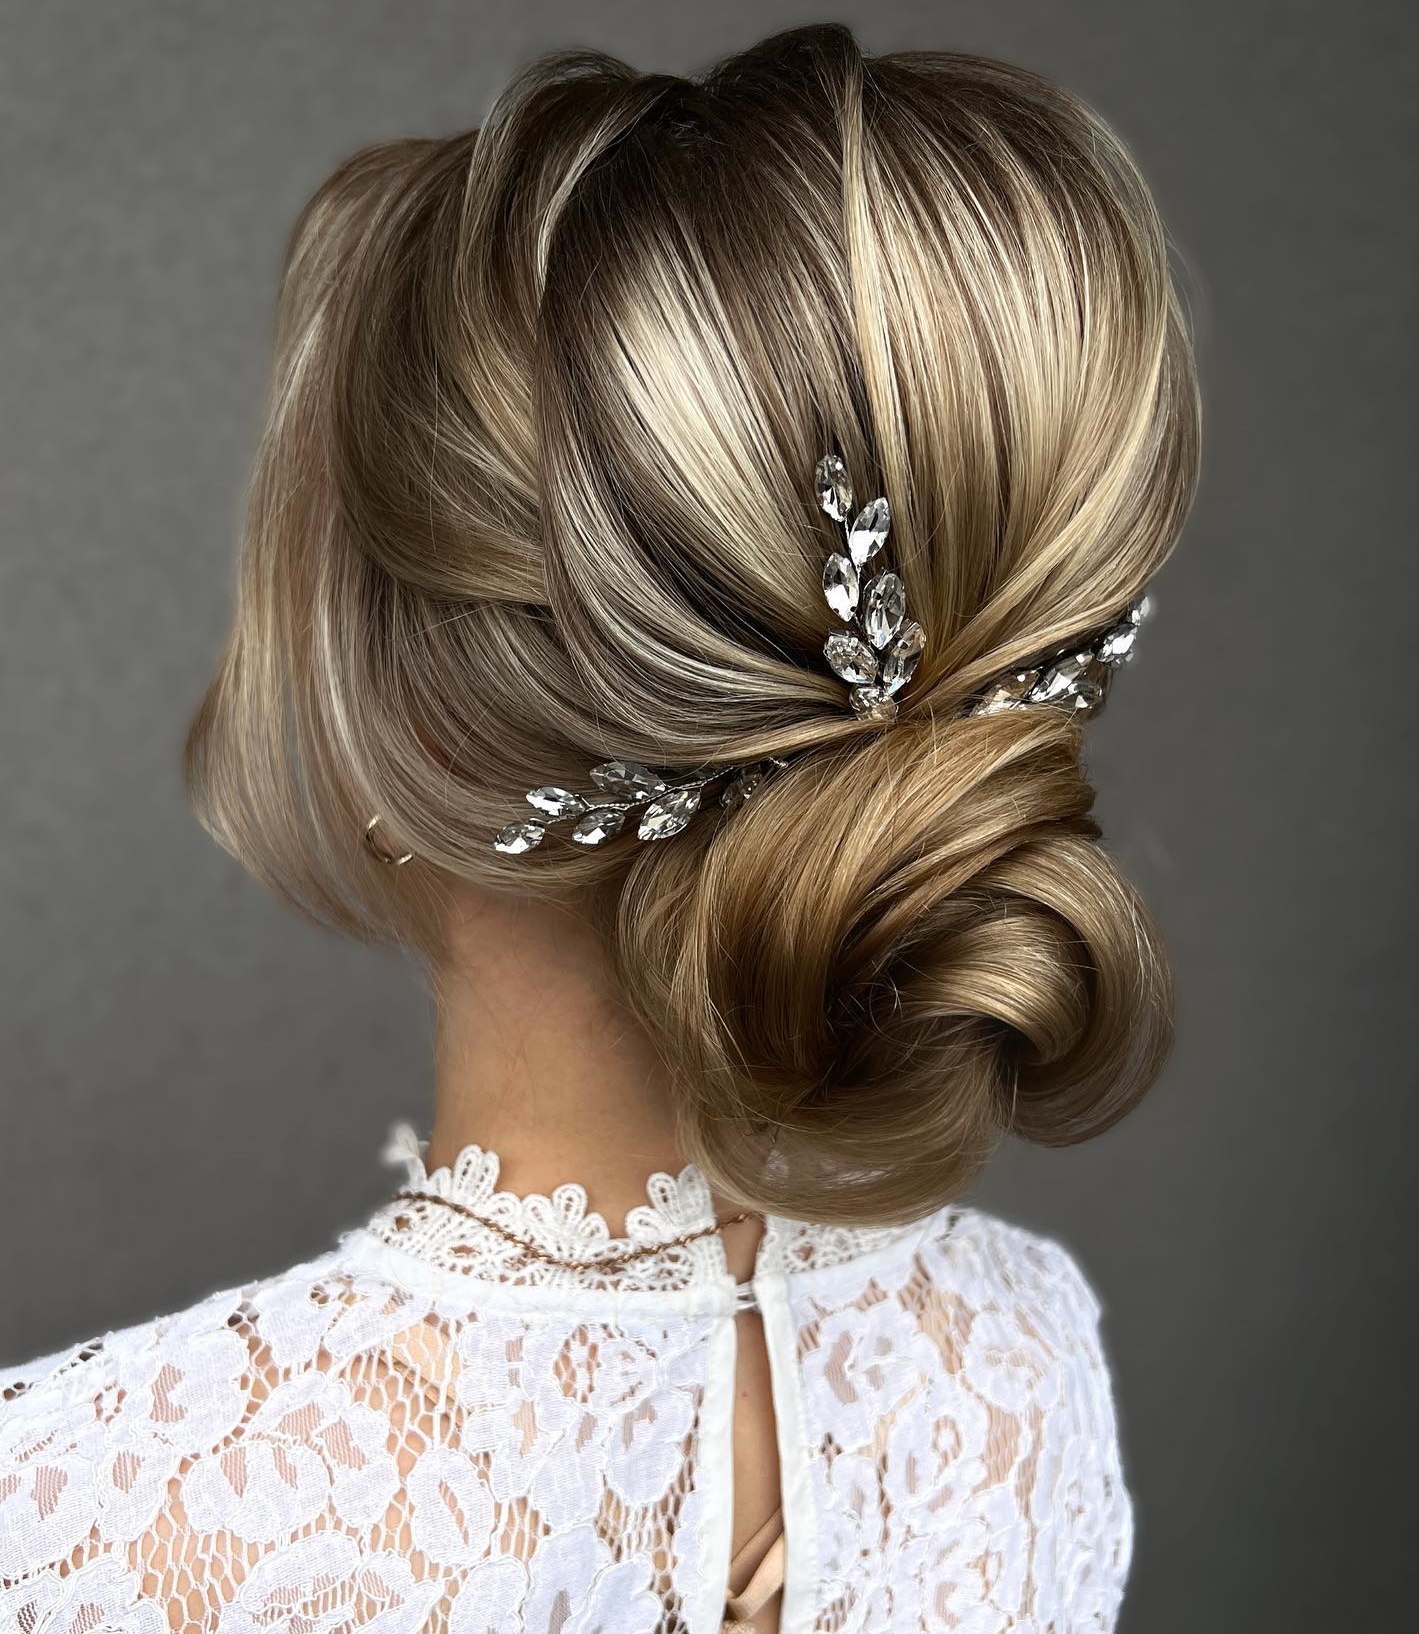 Chignon Wedding Hairstyle on Blonde Hair with Hair Decor